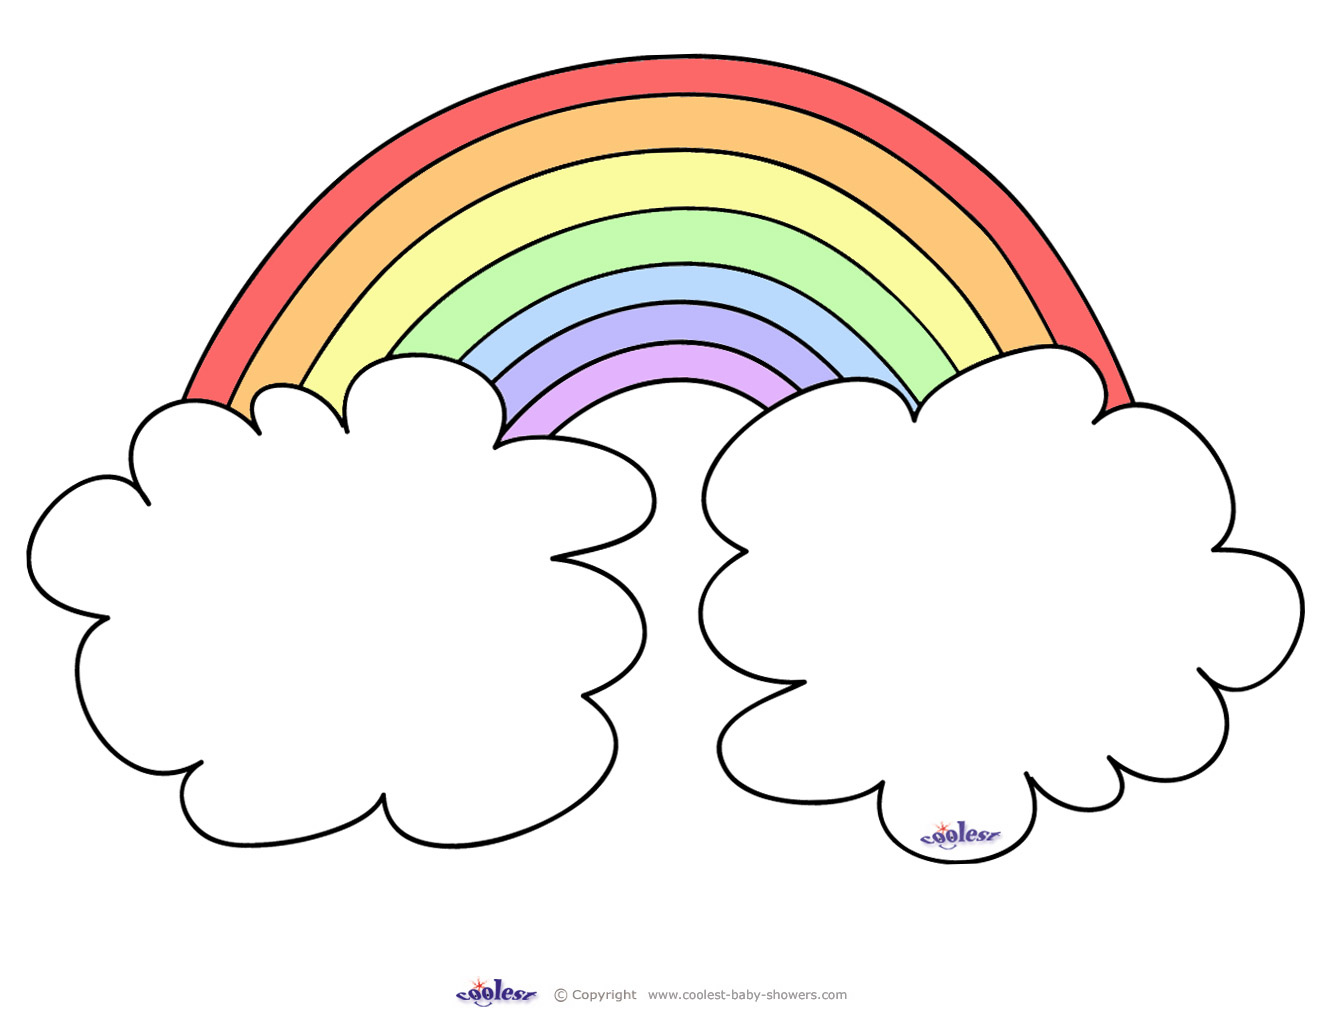 Free Printable Colouring Pages Rainbows thiefleet